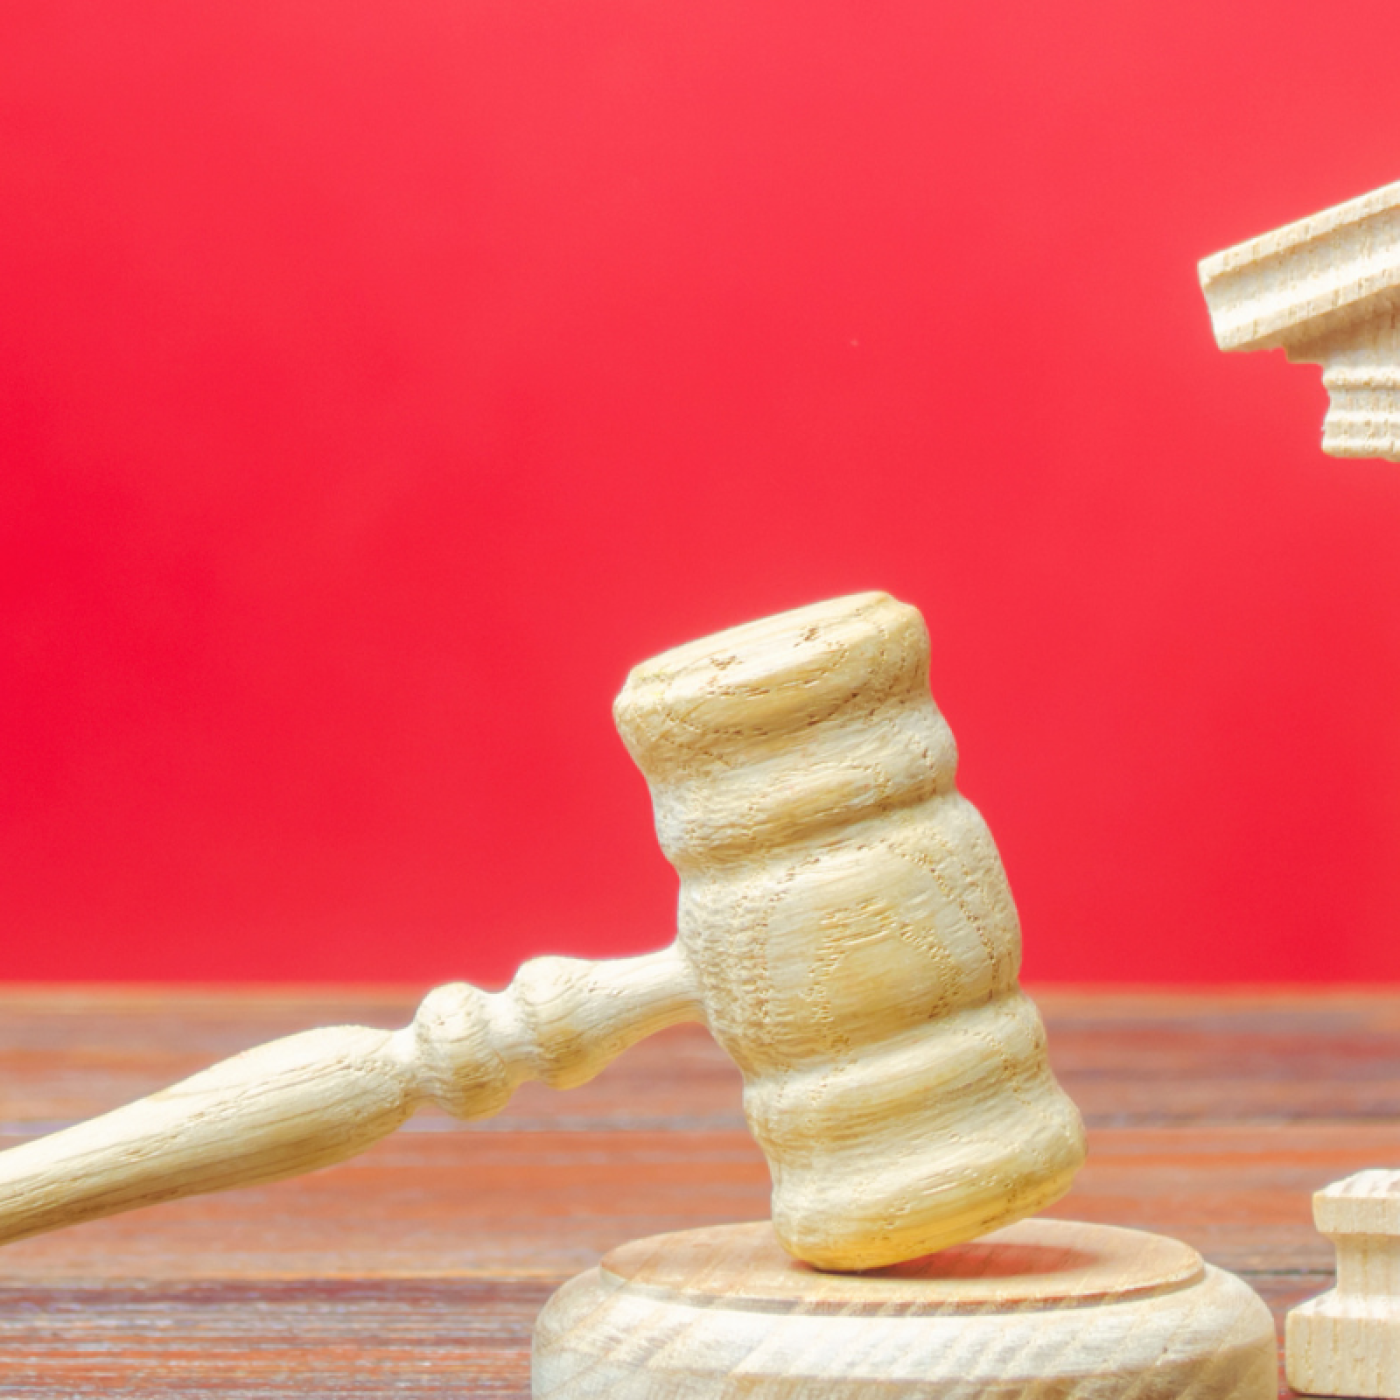 red background, wooden toy structure of a government building, wooden toy gavel. 